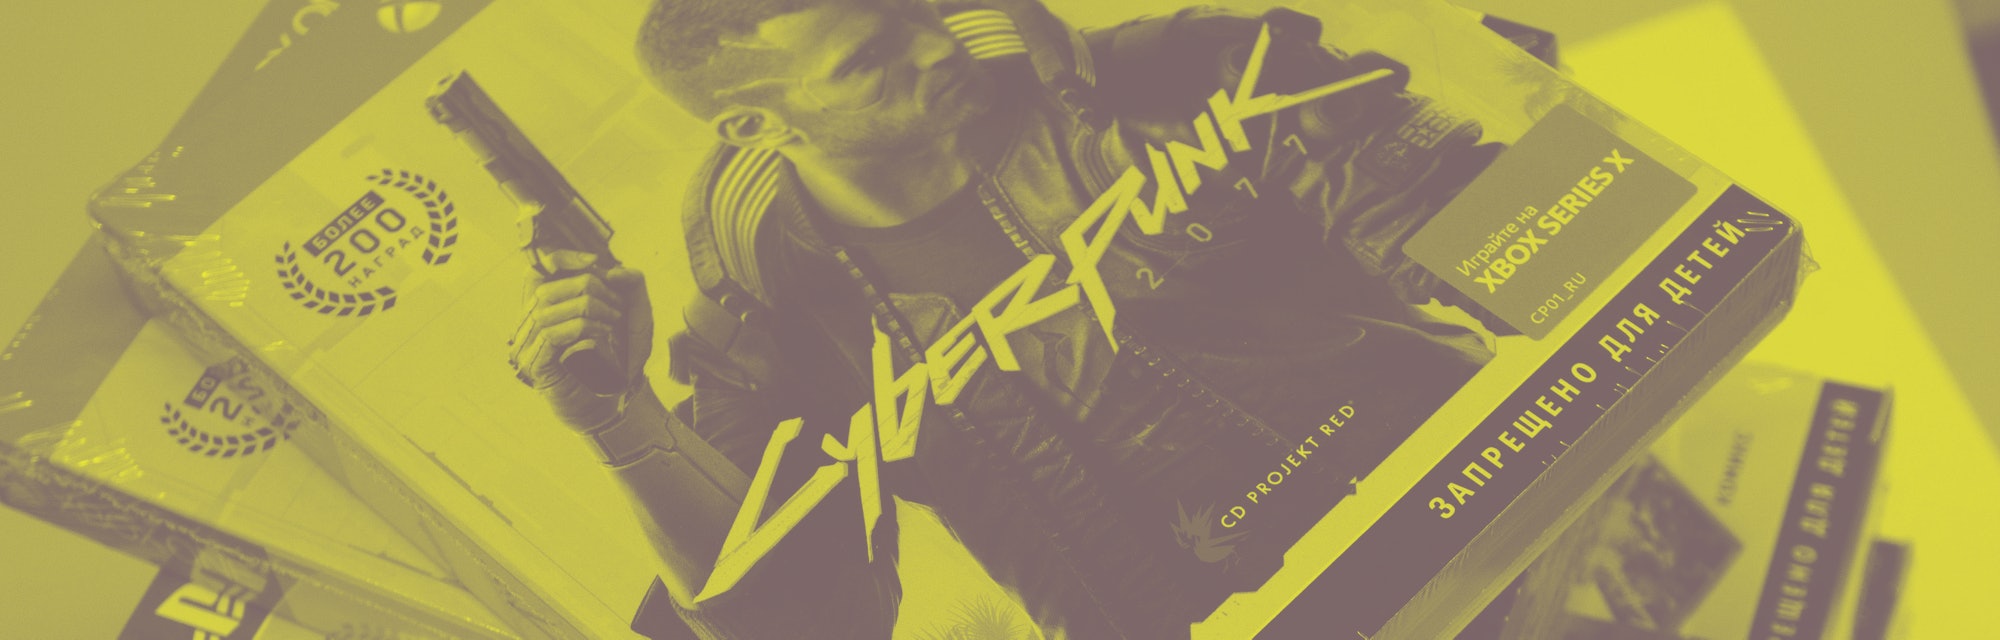 Multiple physical copies of 'Cyberpunk 2077'